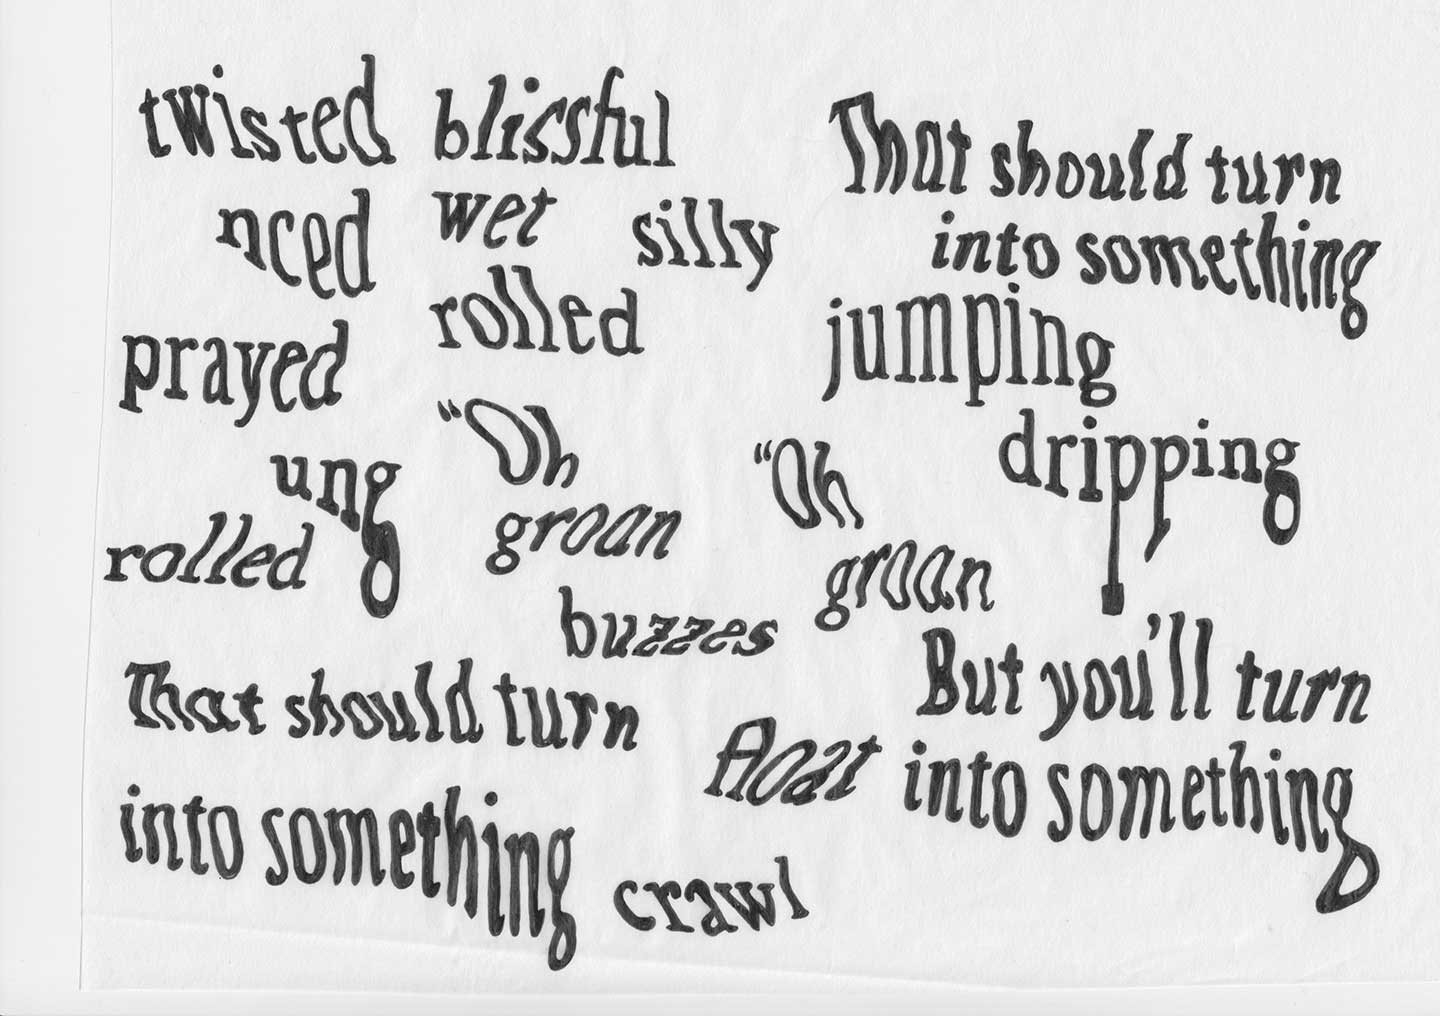 Scan of several warped words, hand drawn